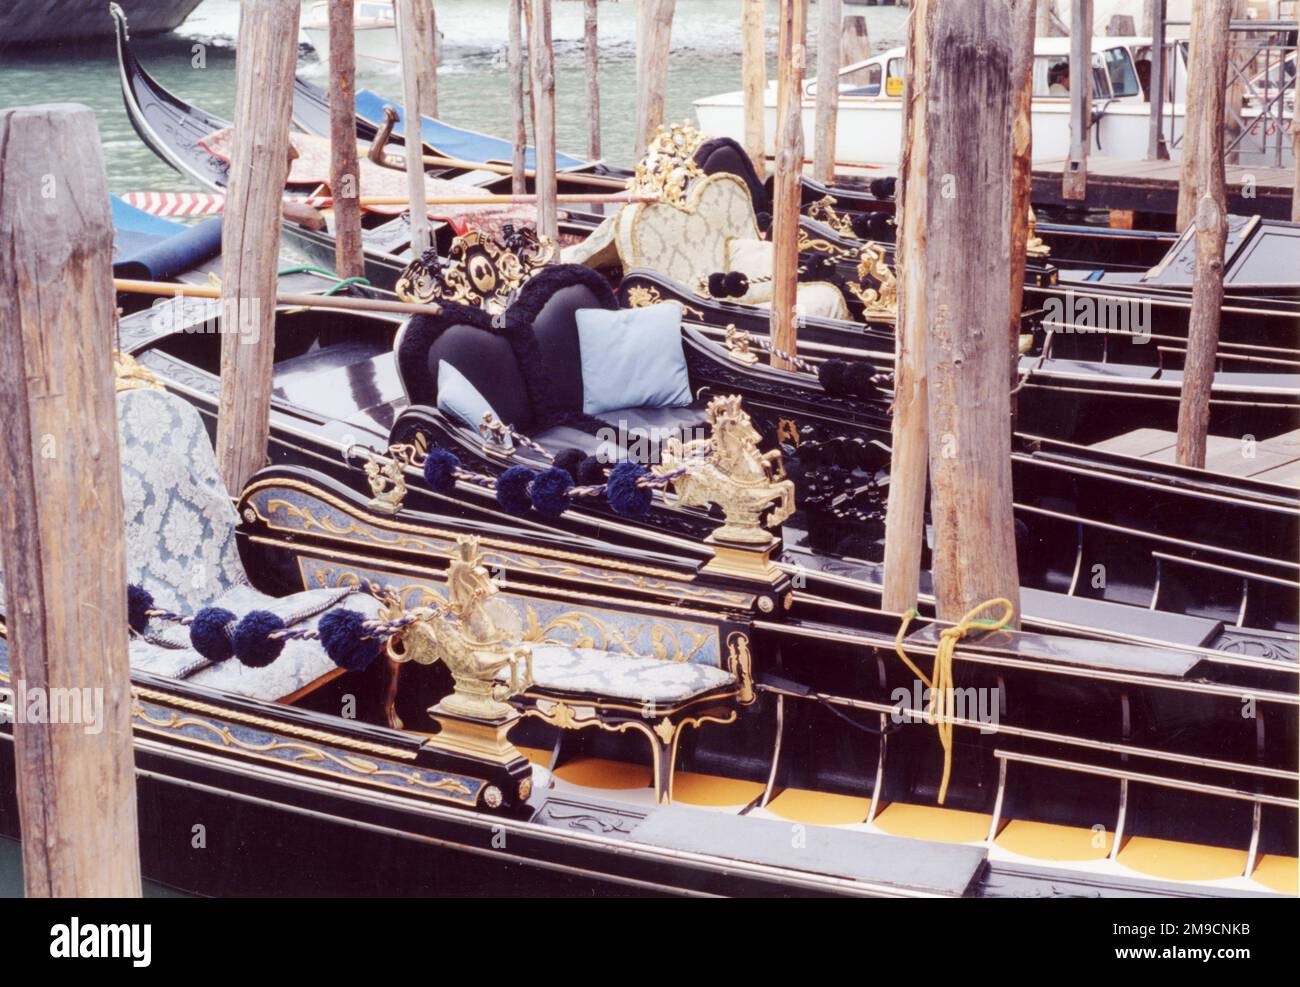 A row of gondolas moored on a canal in Venice, showing details of their ornate furnishings. Stock Photo